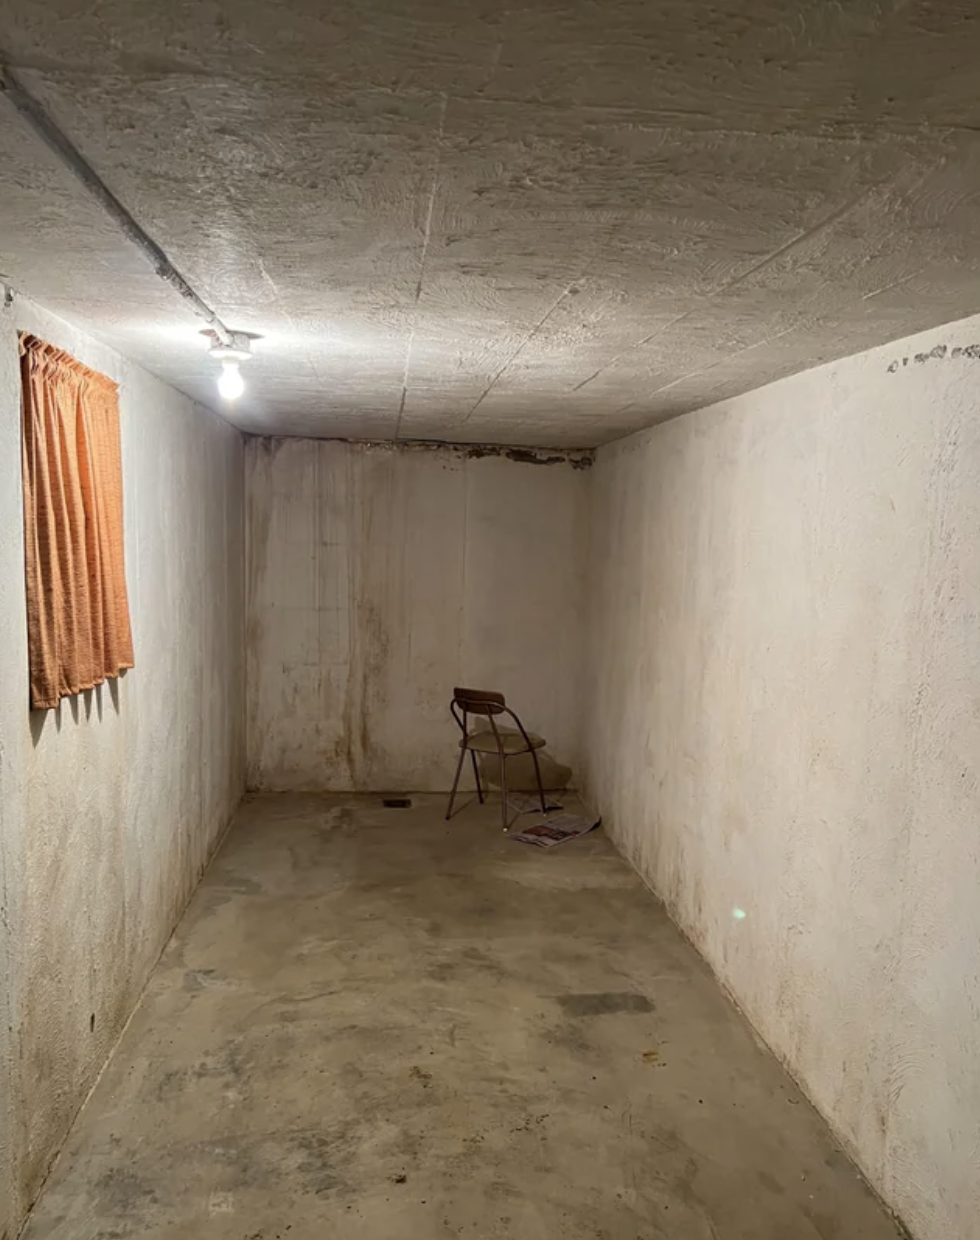 Empty, narrow, windowless room with dirty walls, a single light bulb, and a metal folding chair